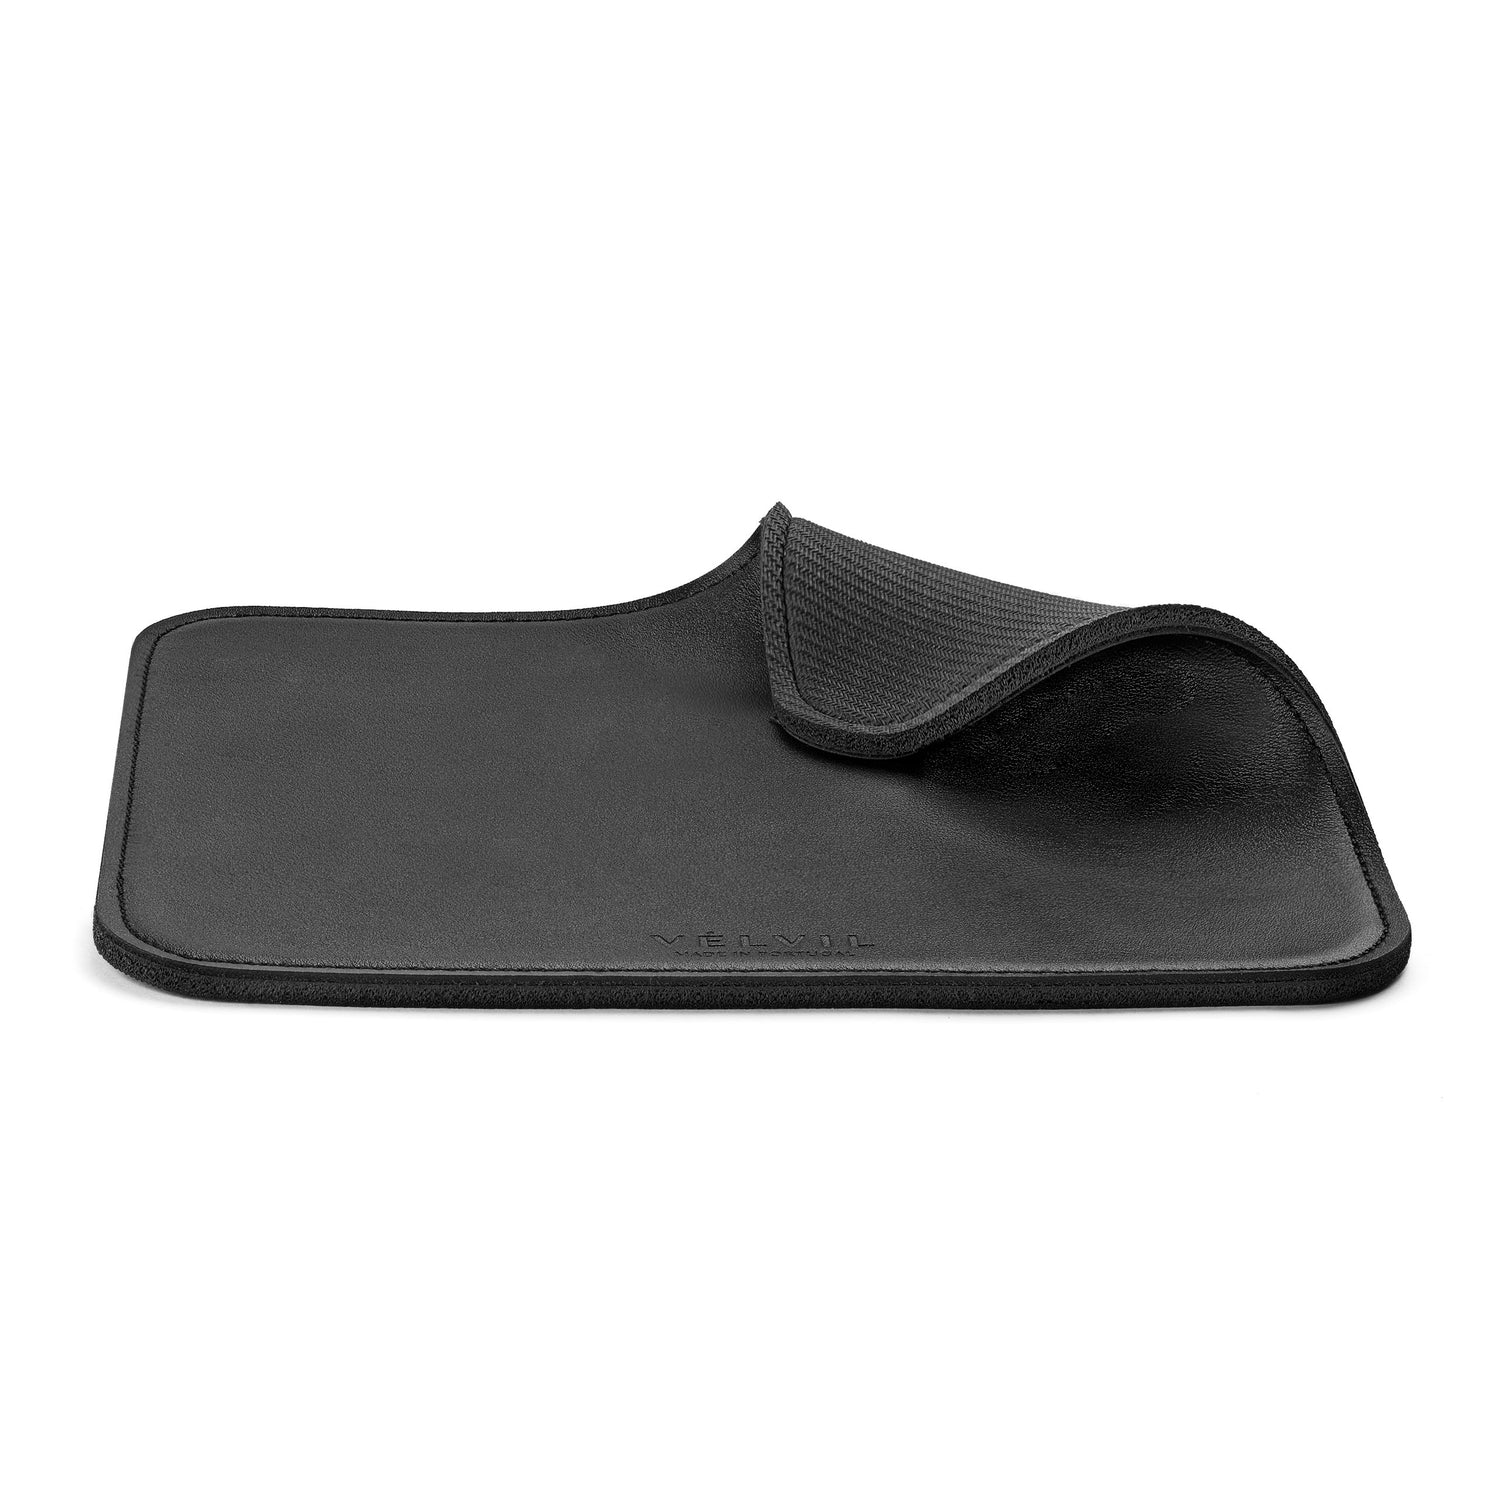 Leather mouse pad with soft rubber base